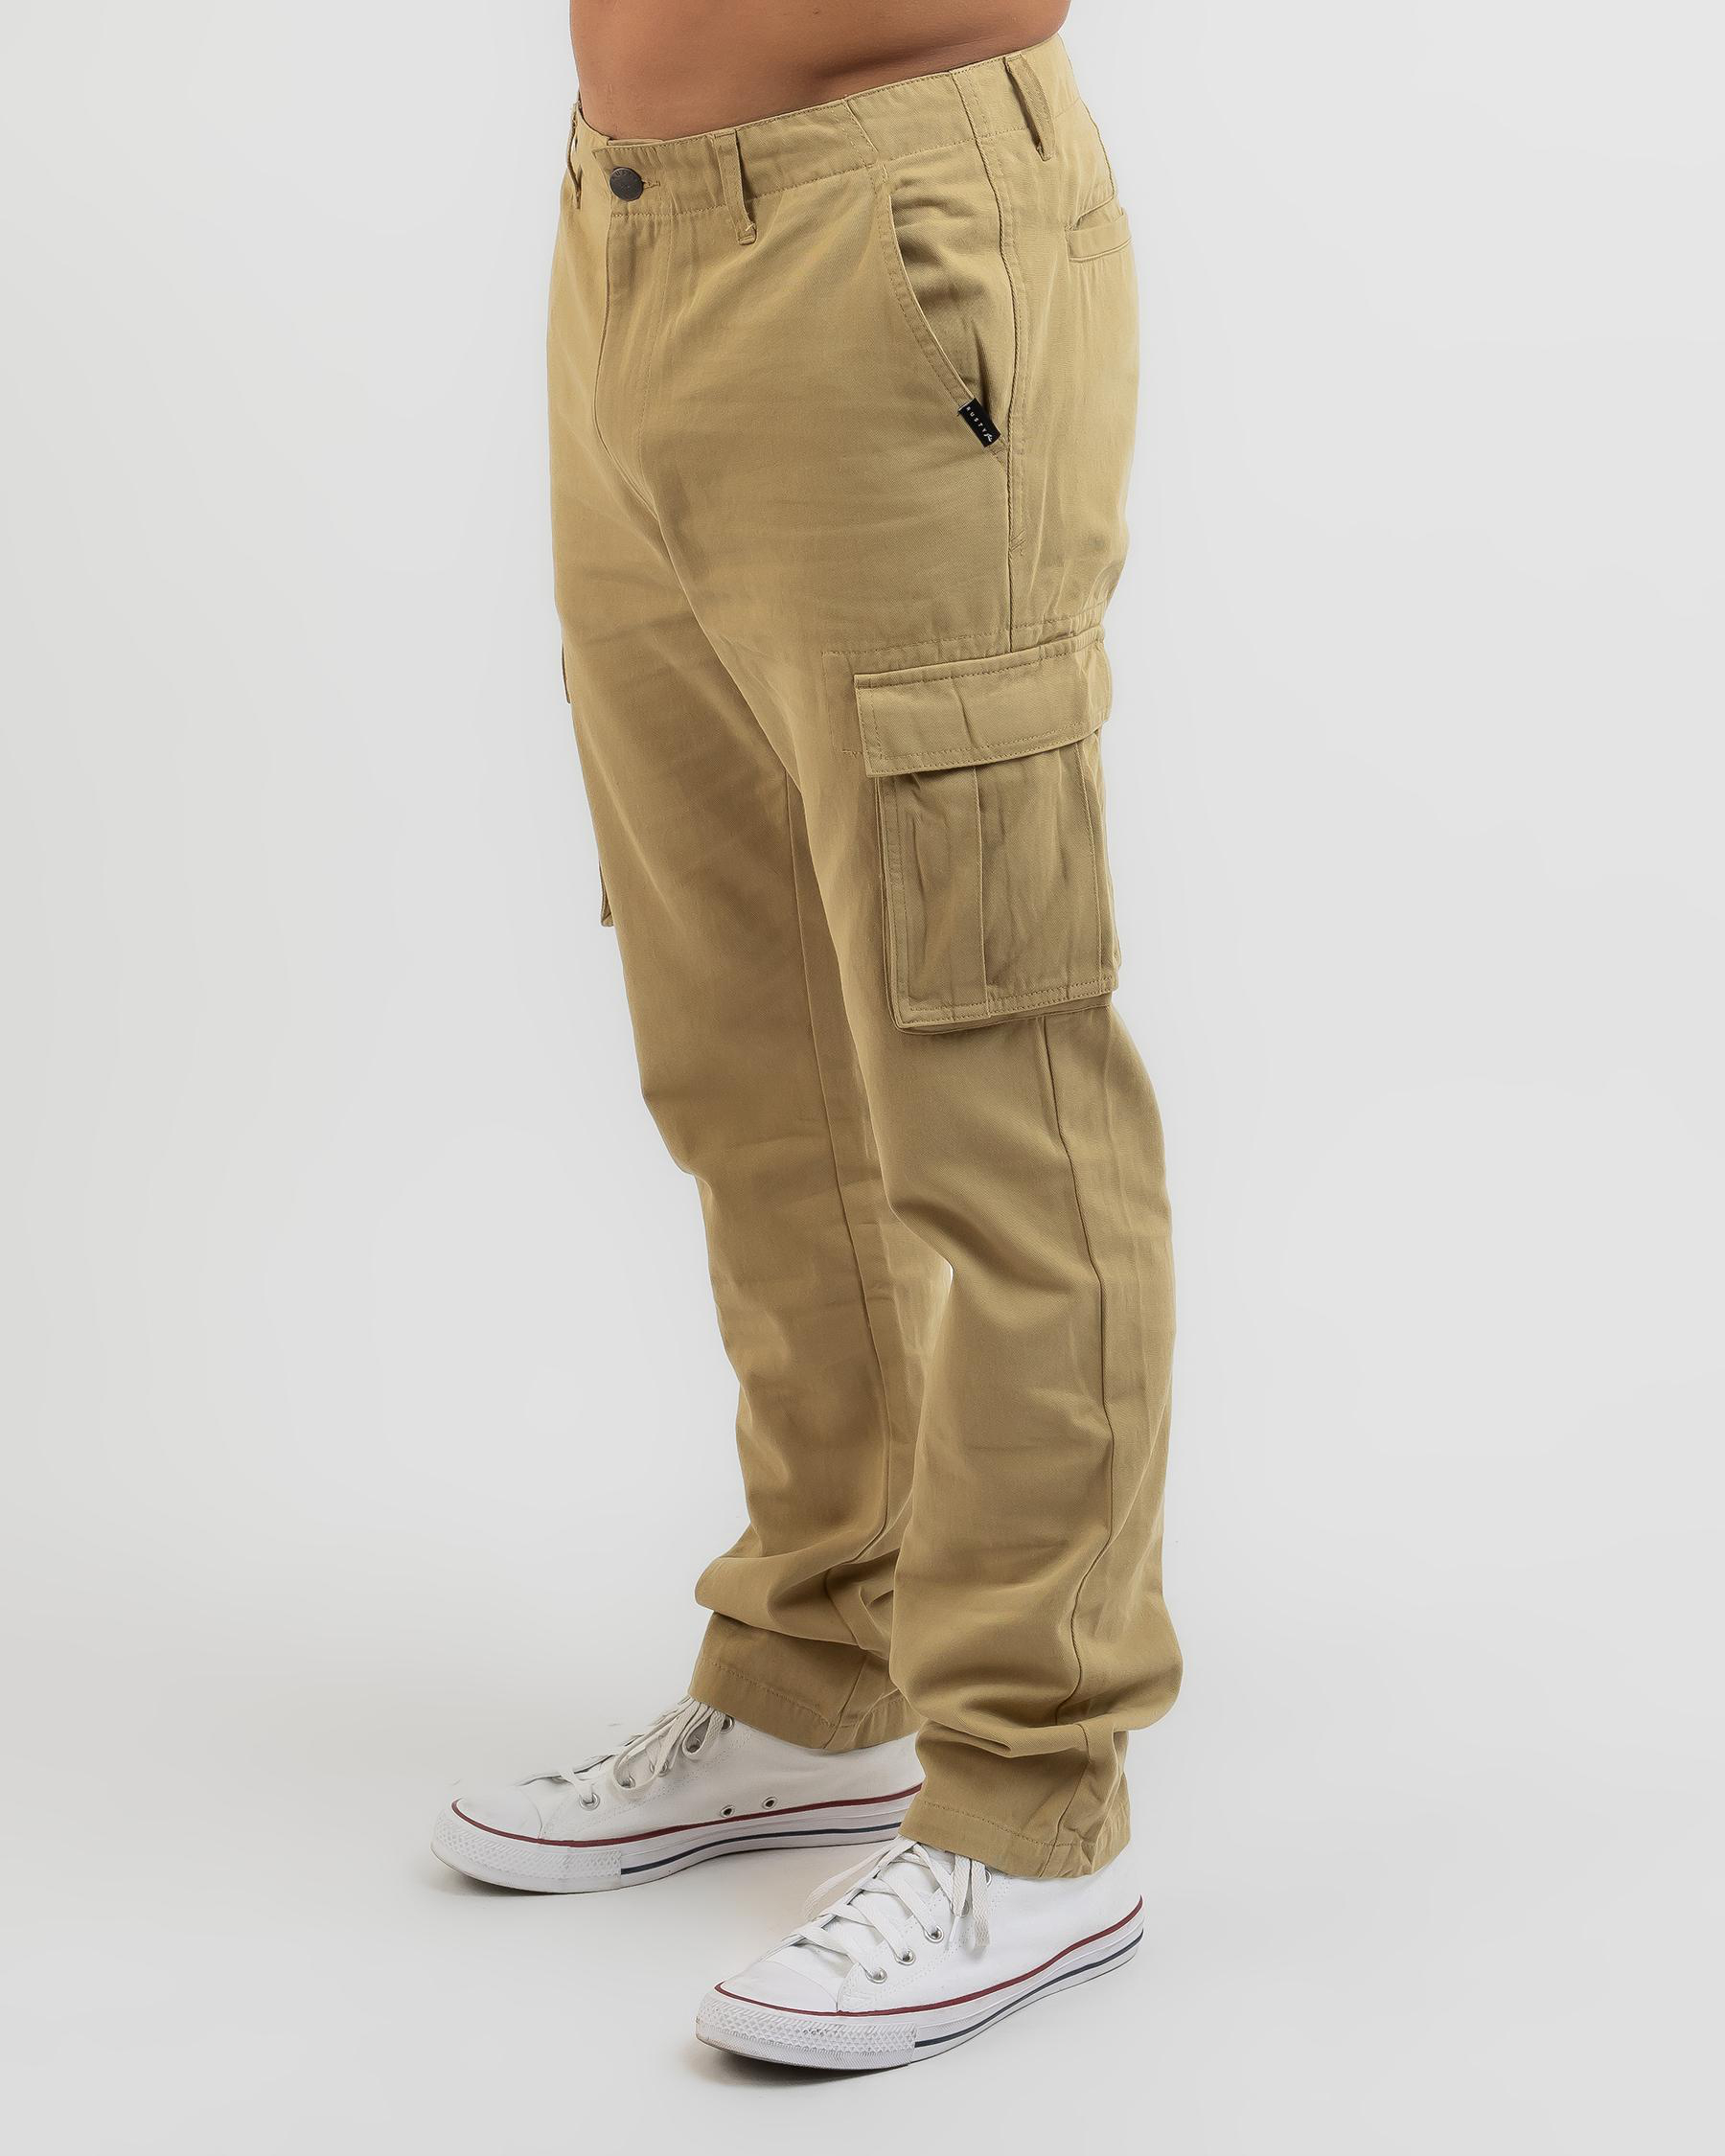 Rusty Manila Cargo Pants In Sand - Fast Shipping & Easy Returns - City ...